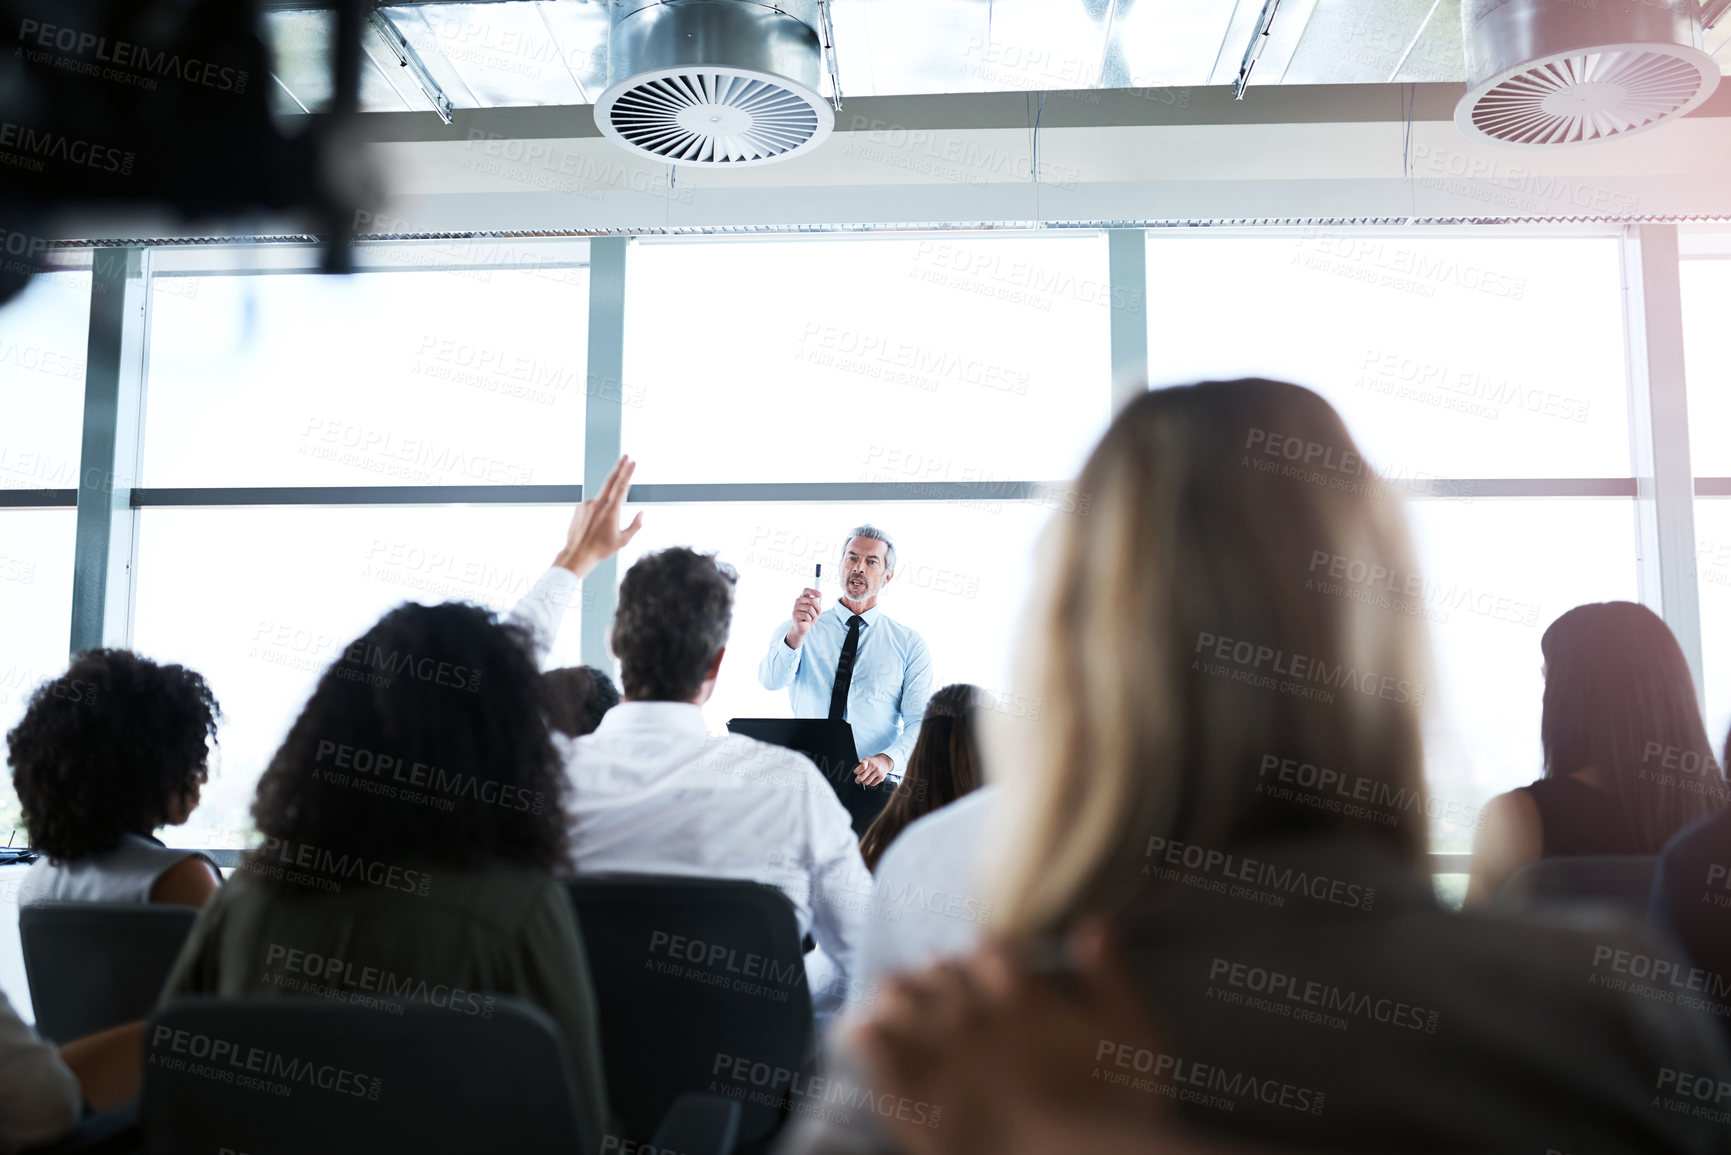 Buy stock photo Shot of a group of businesspeople raising their hands during a presentation